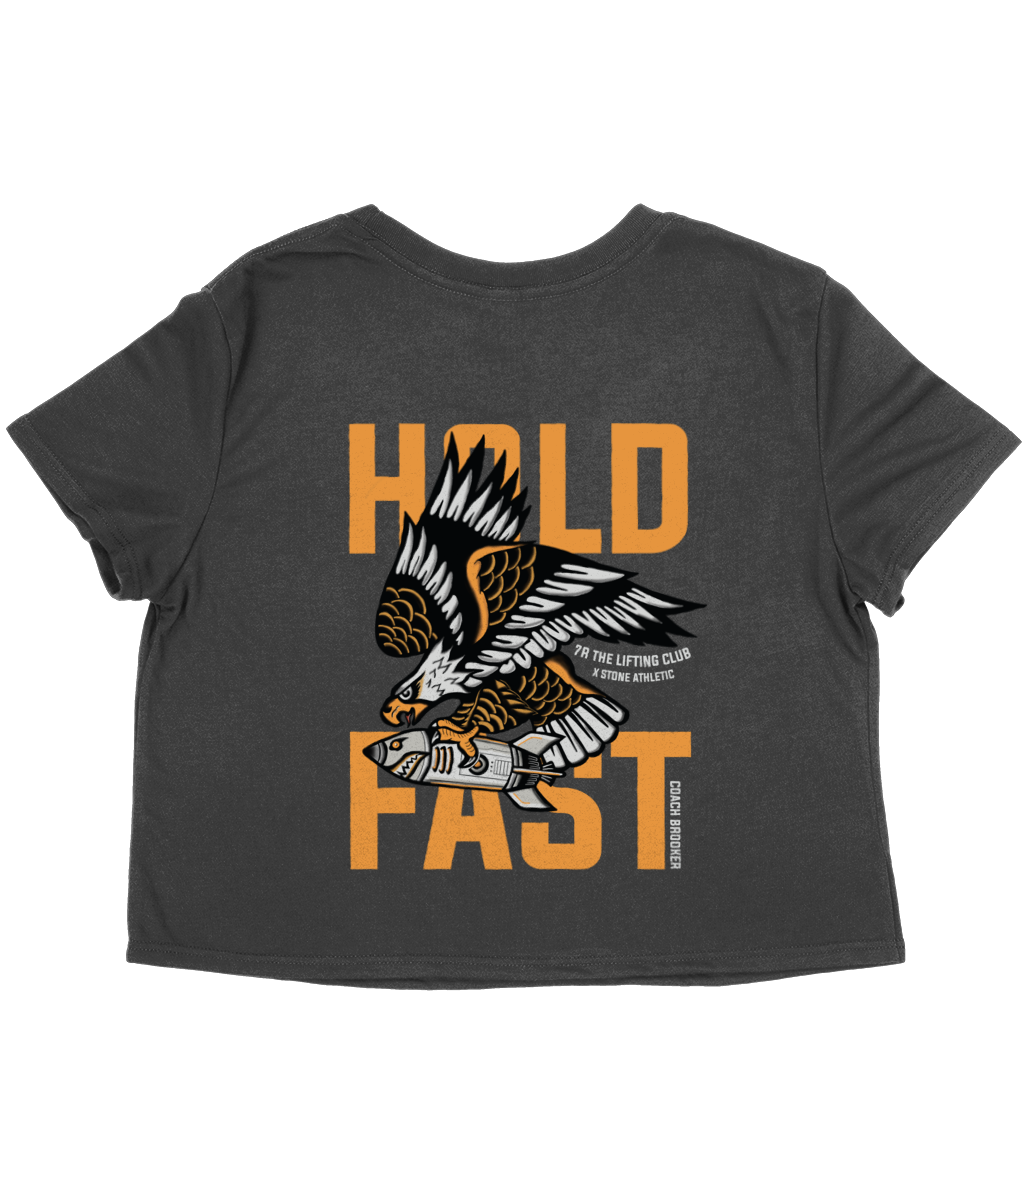 Hold Fast Cropped Tee - 7R Lifting Club